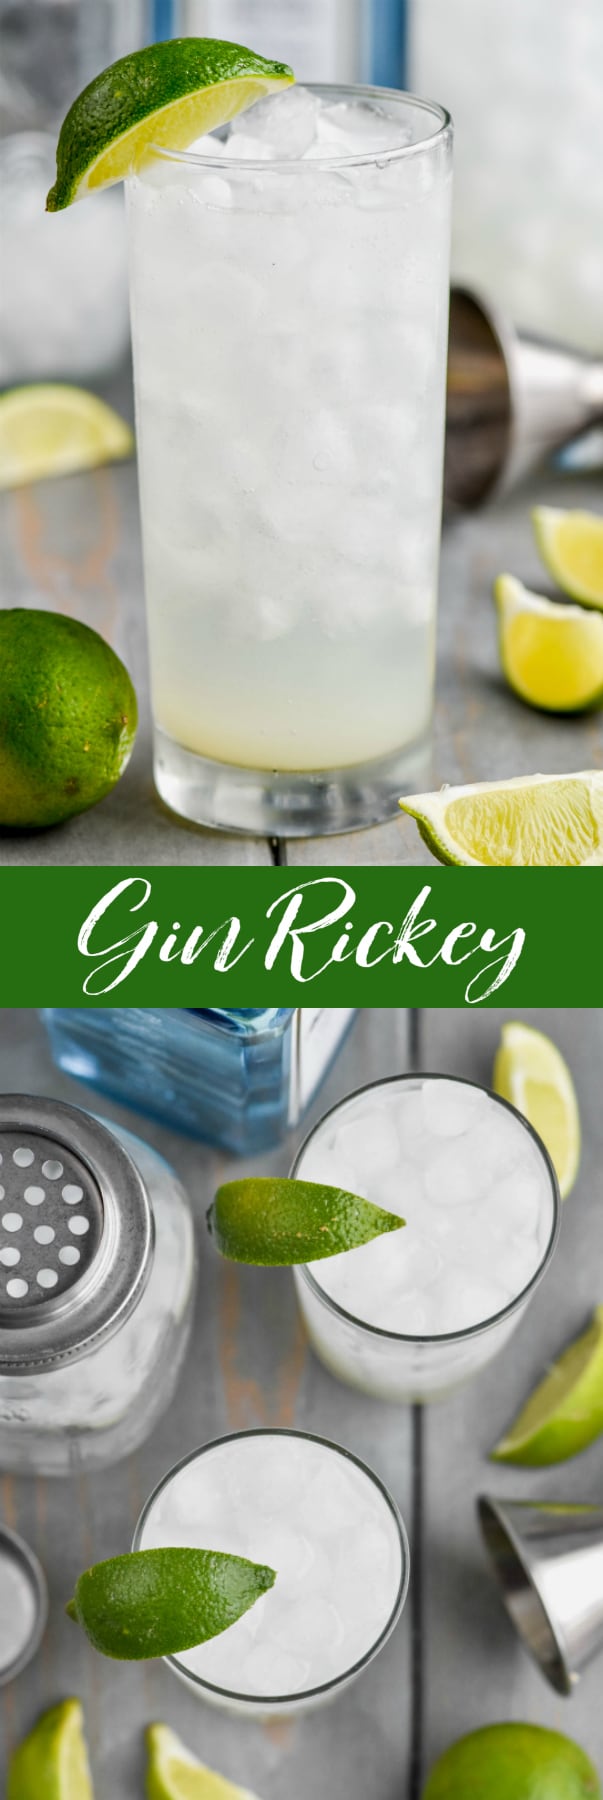 Gin Rickey Recipe Shake Drink Repeat,Pictures Of Ducks Landing On Water